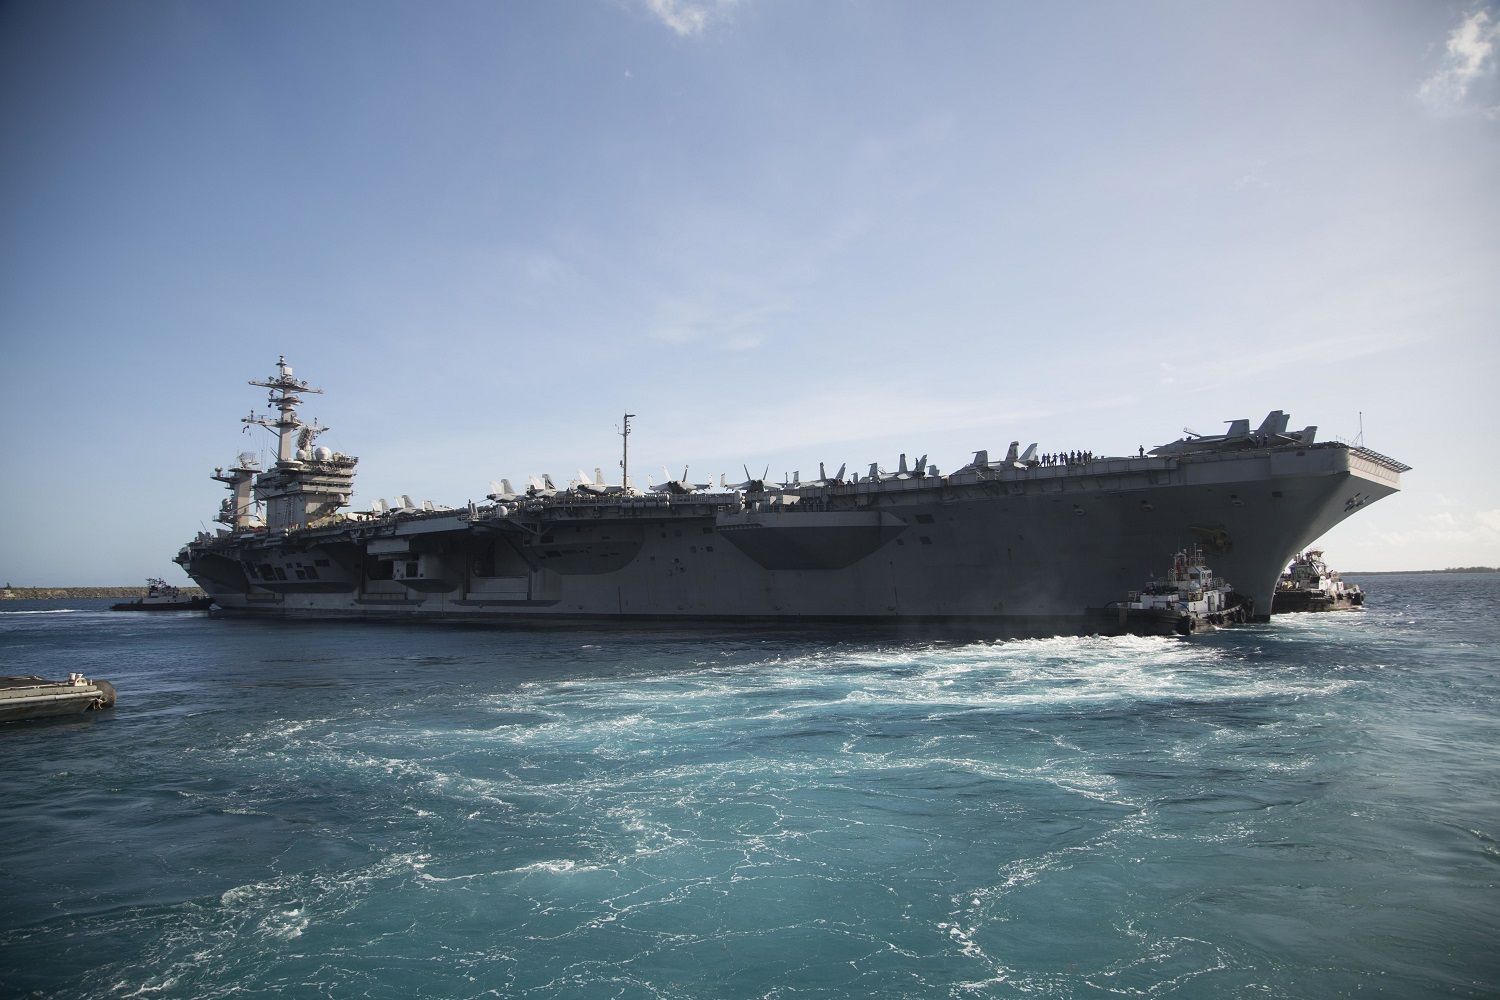 The aircraft carrier USS Theodore Roosevelt (CVN 71) departs Apra Harbor following an extended visit to Guam in the midst of the COVID-19 global pandemic. Theodore Roosevelt is underway conducting carrier qualifications during a deployment to the Indo-Pacific. (U.S. Marine Corps photo by Staff Sgt. Jordan E. Gilbert/Released)